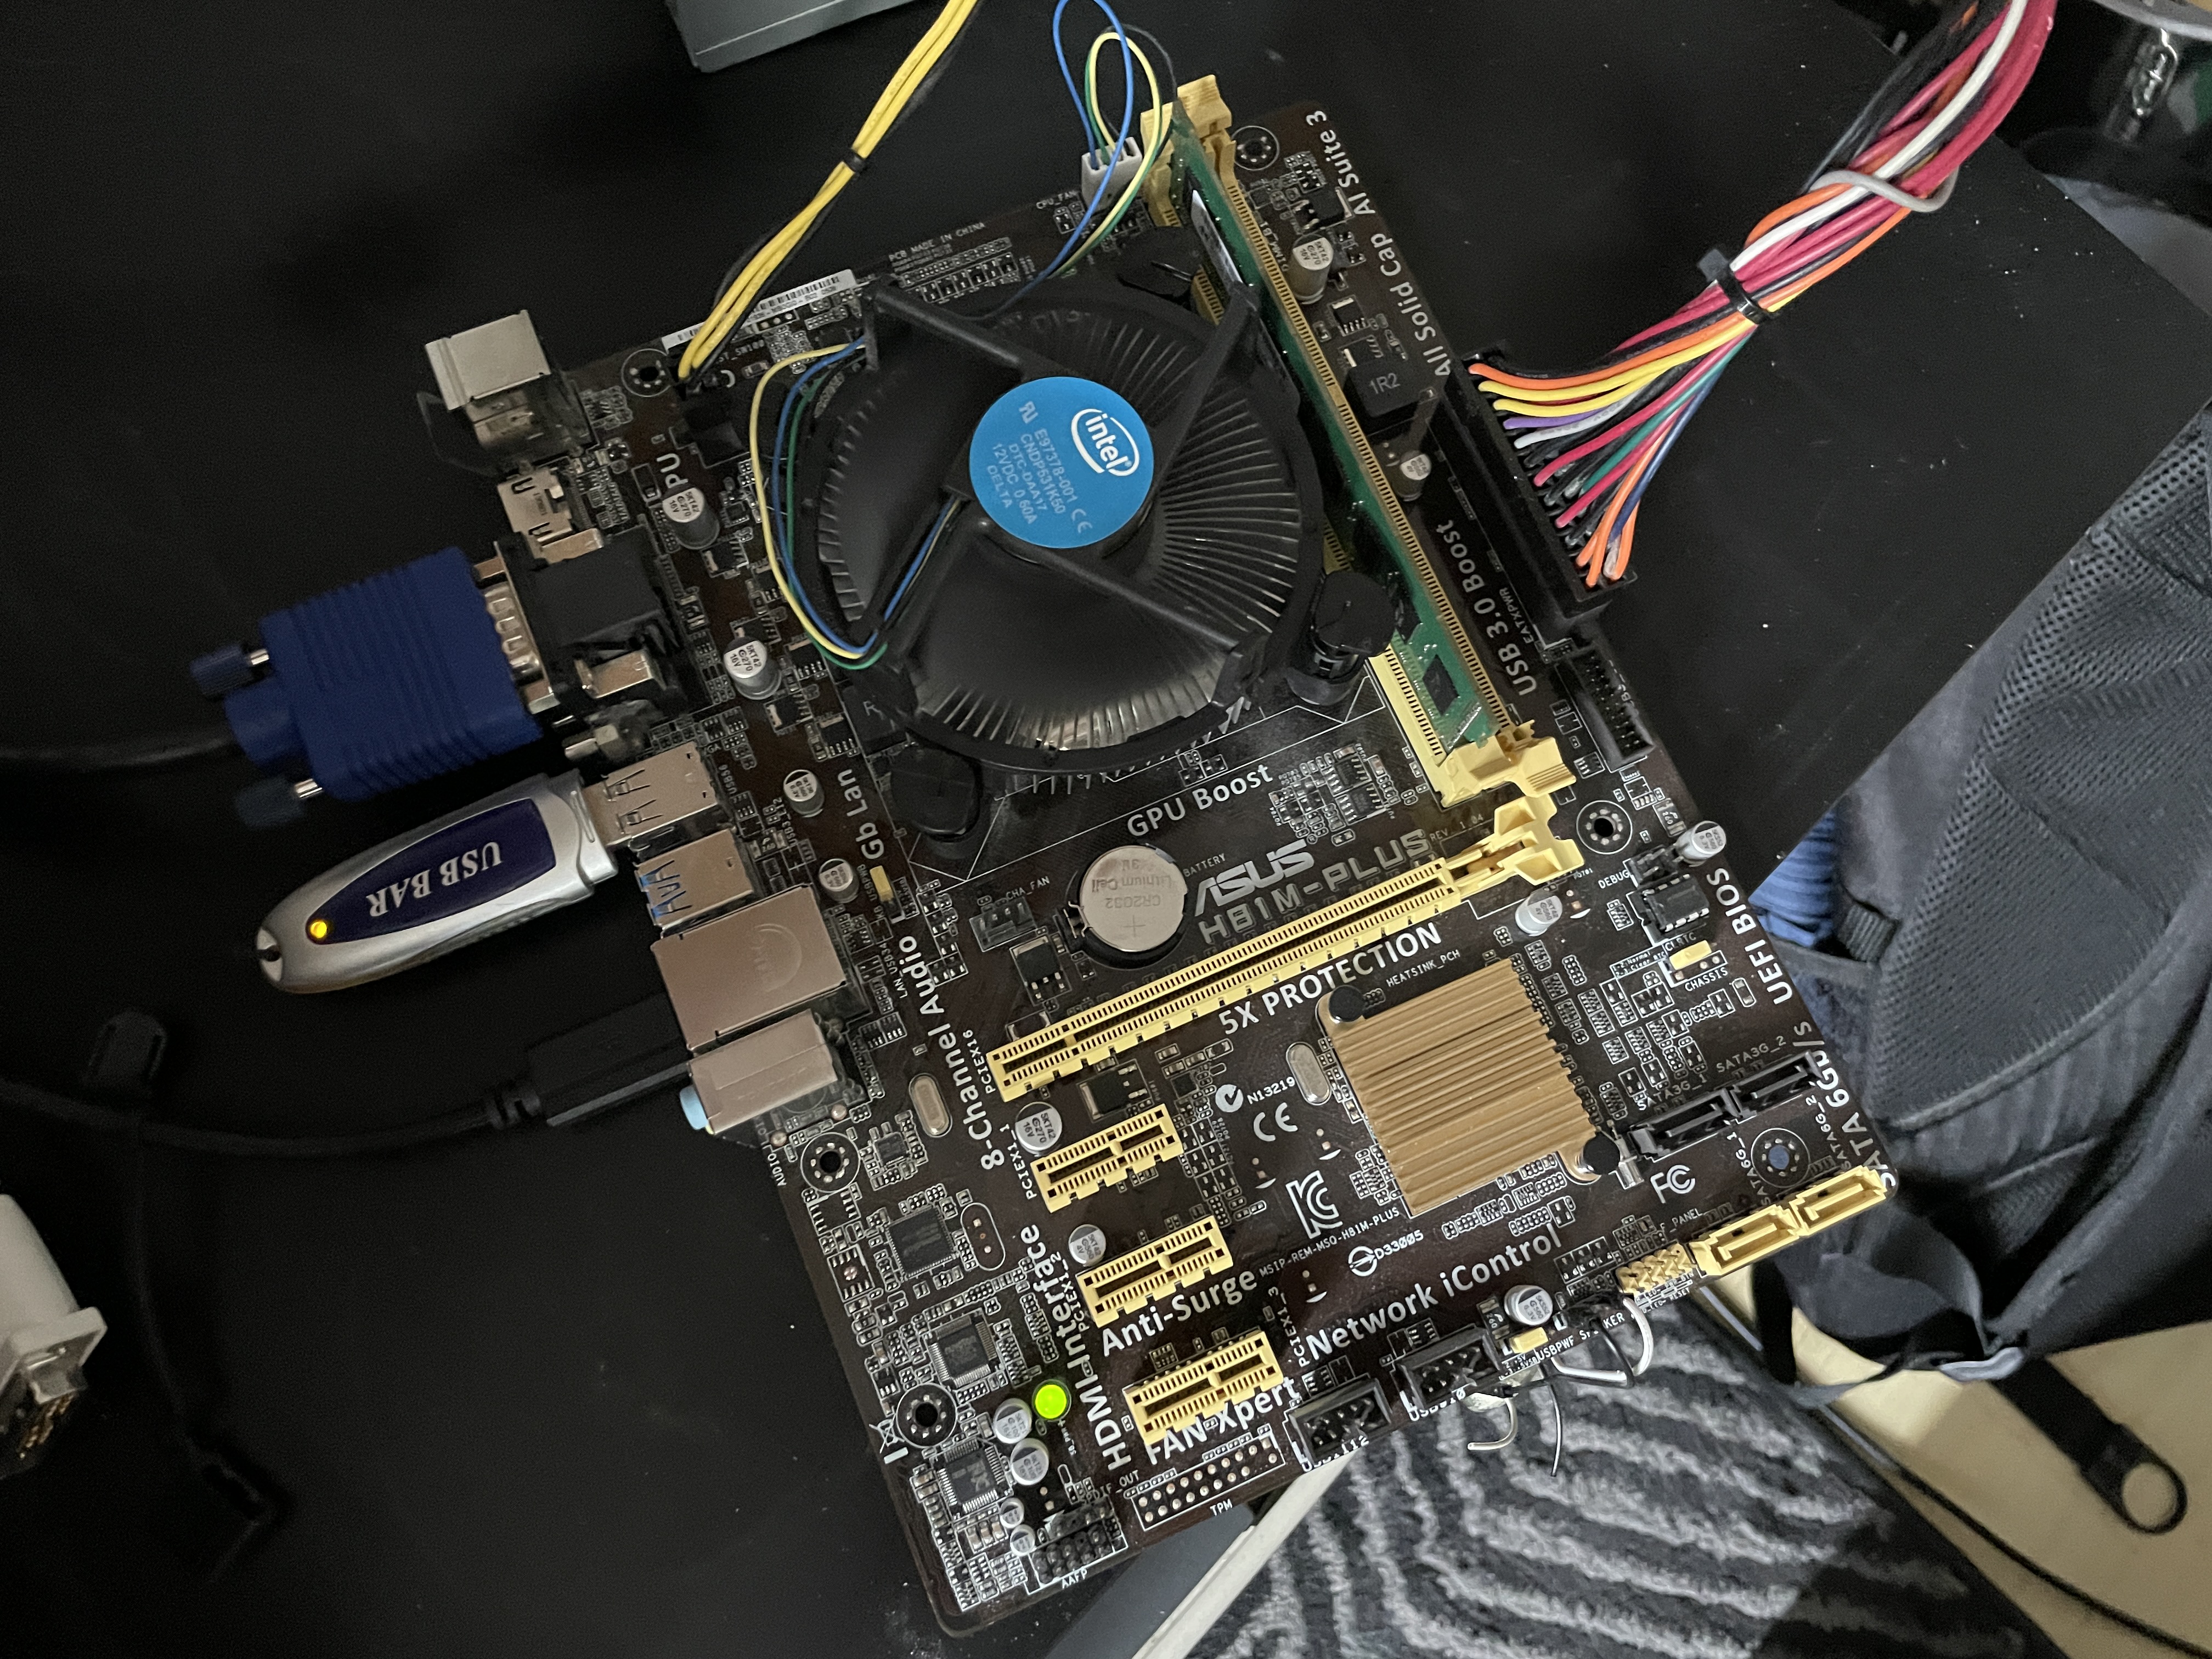 ASUS board in question